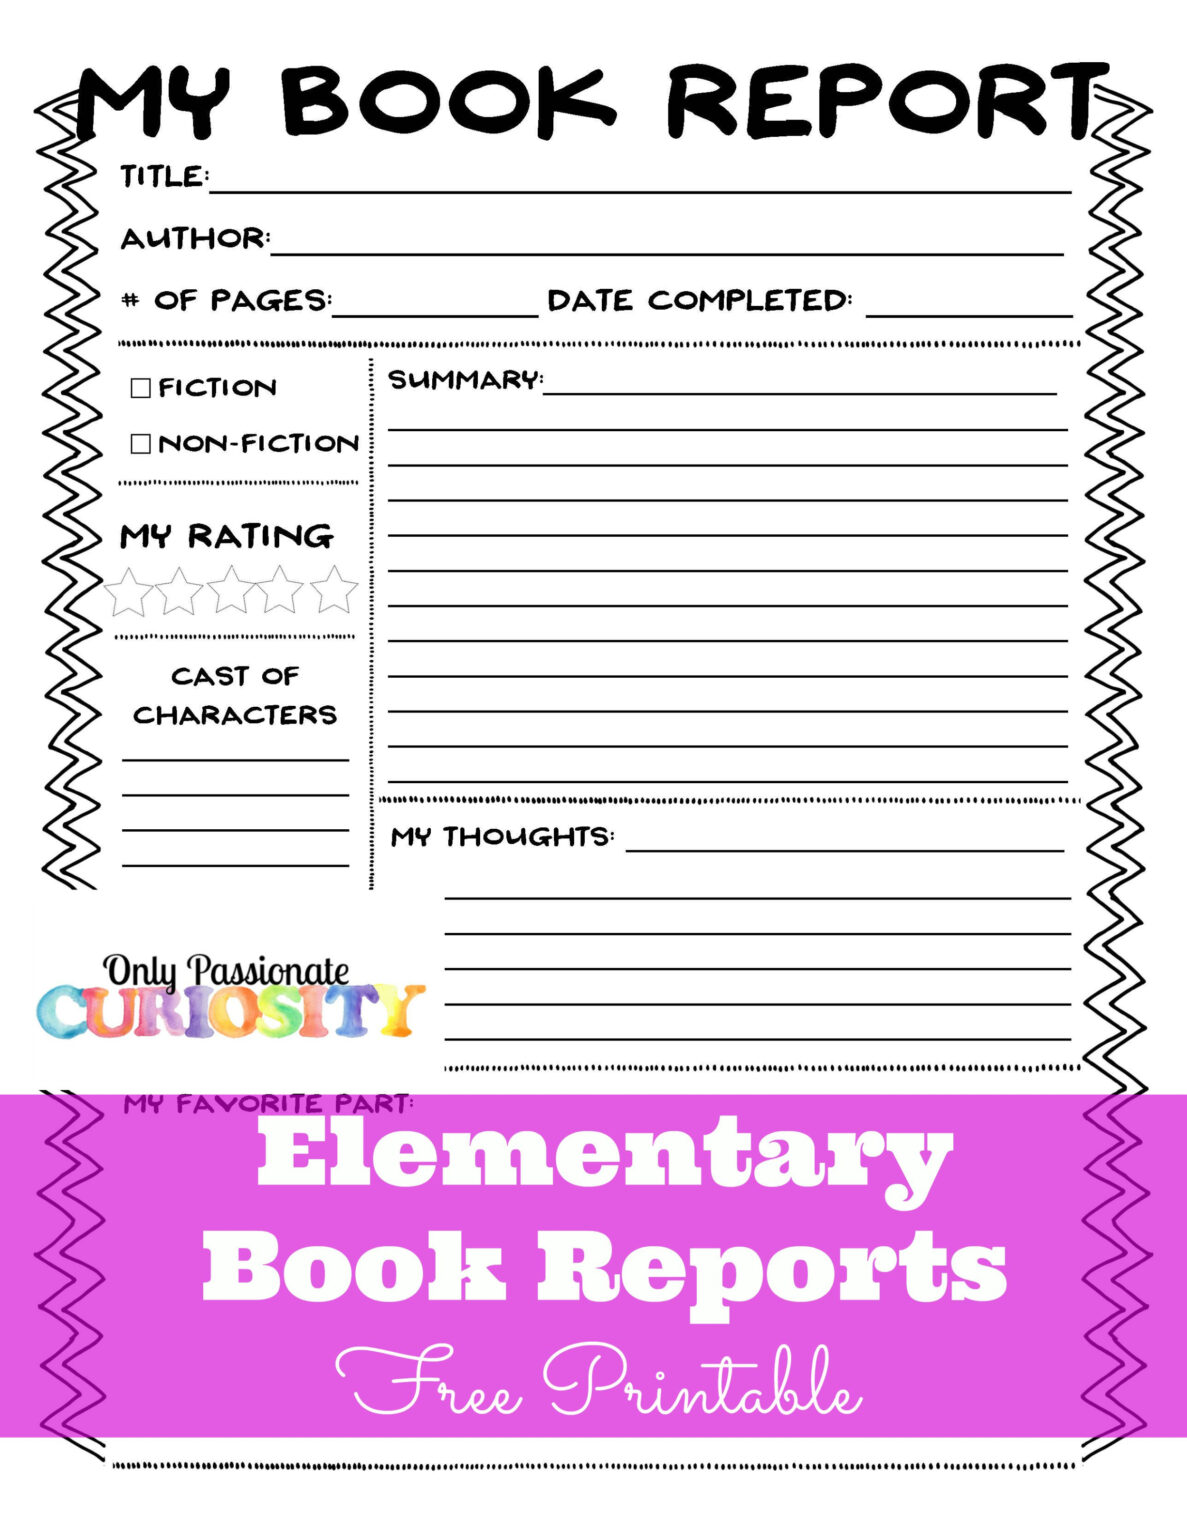 free-book-report-template-for-5th-graders-example-tacitproject